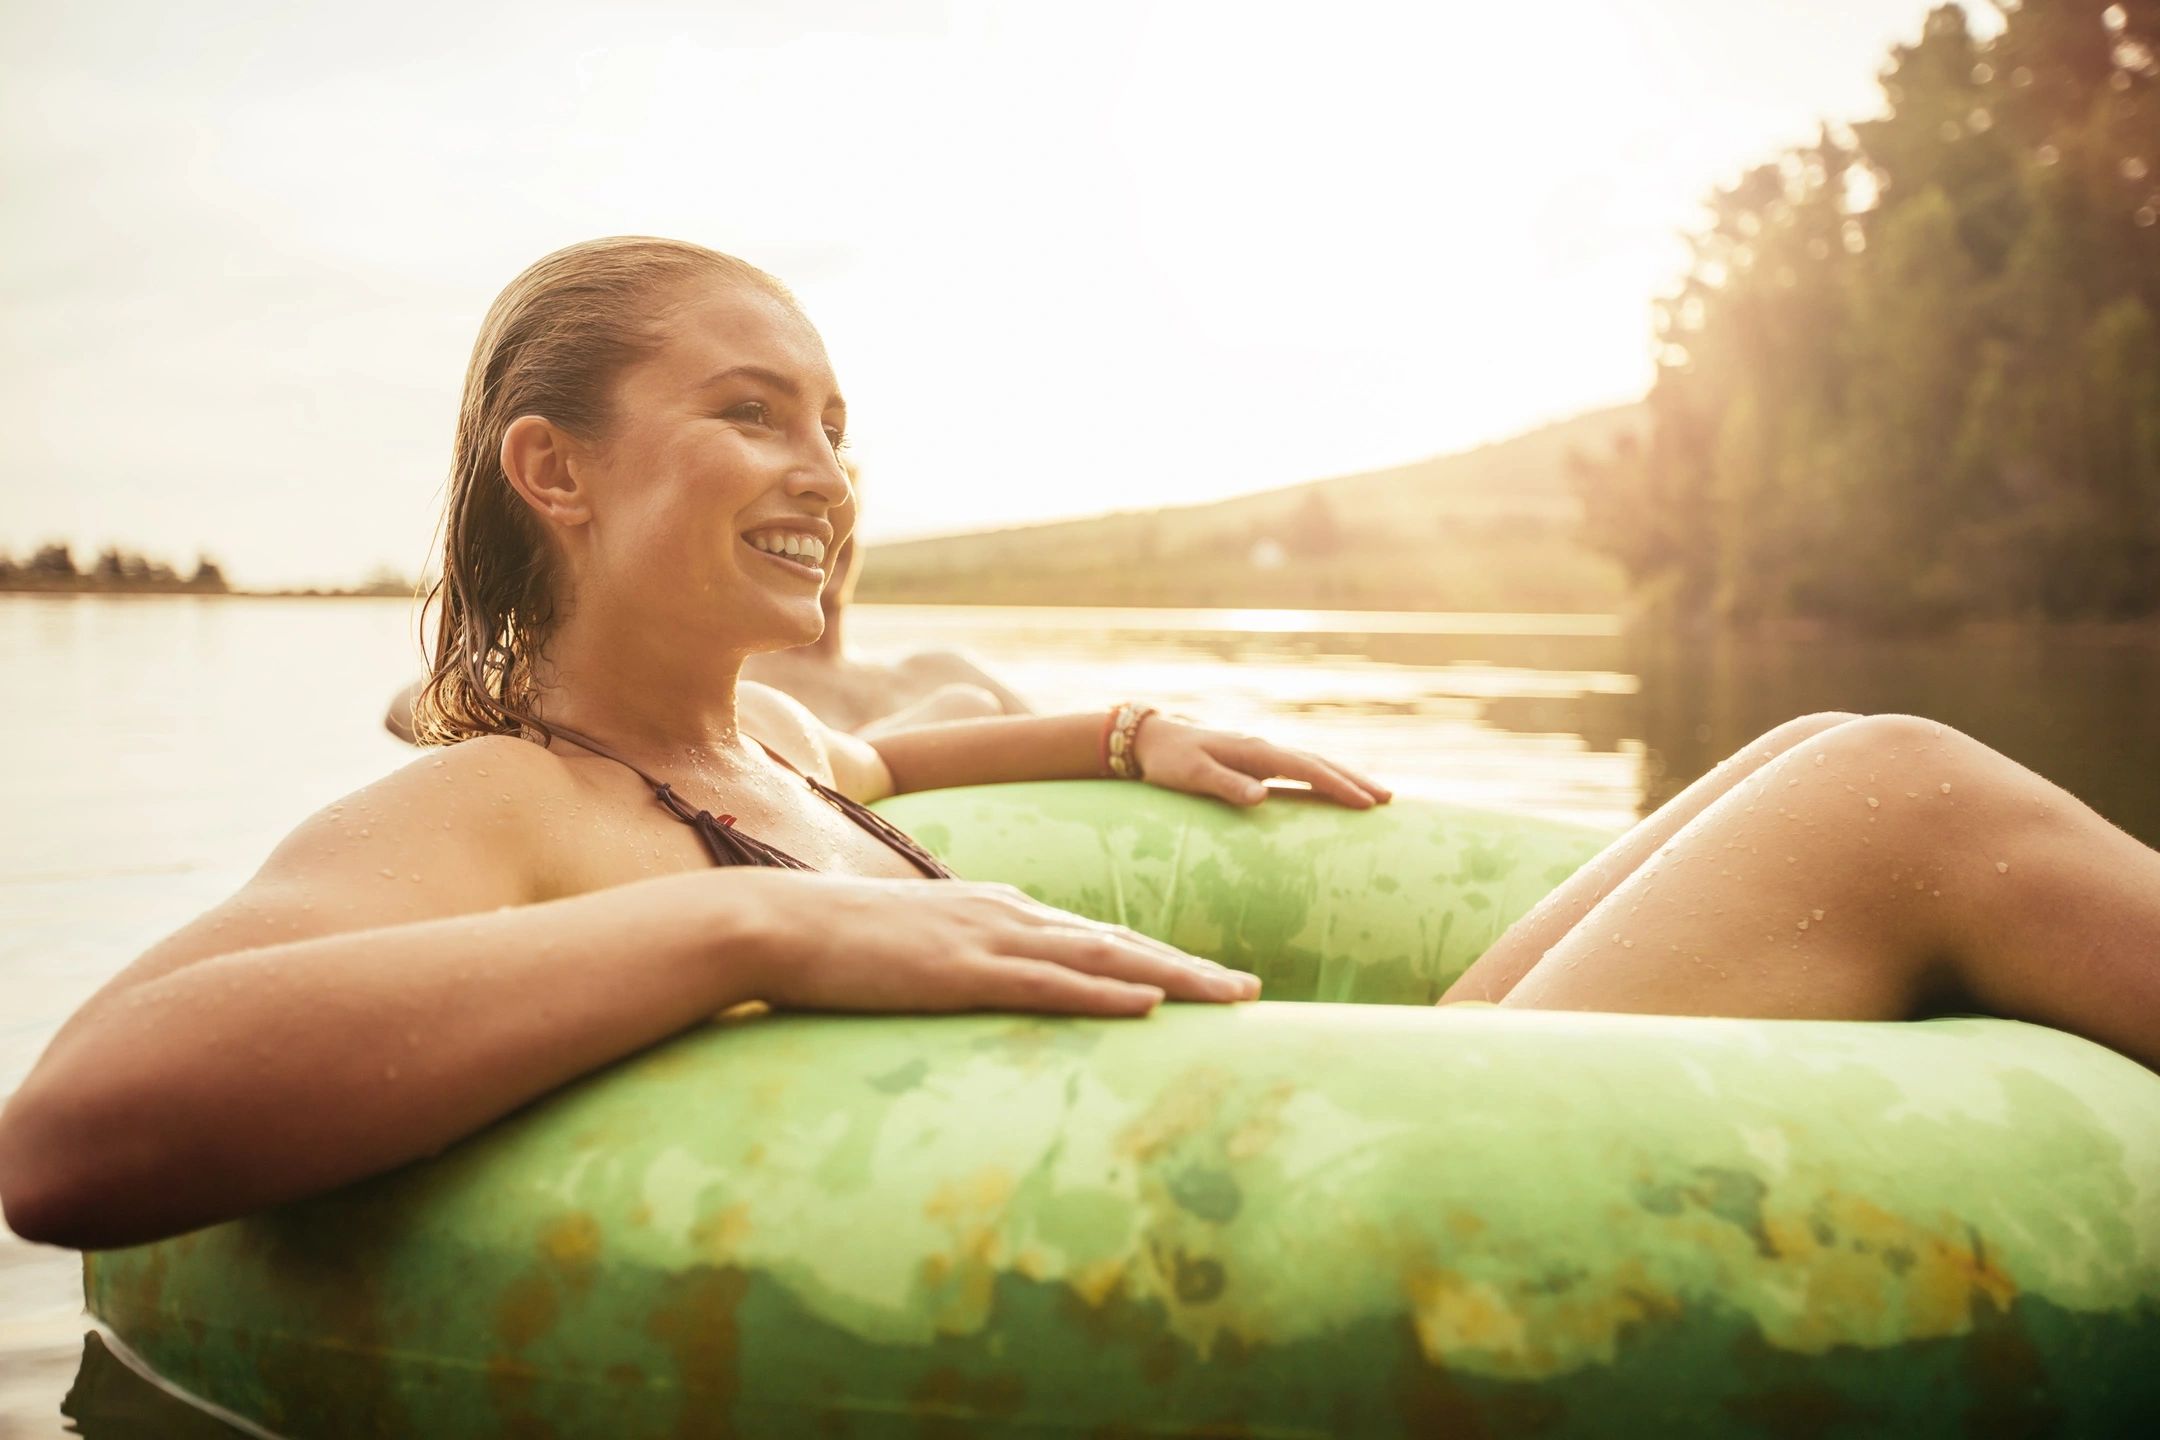 woman floating on an inner tube down a river